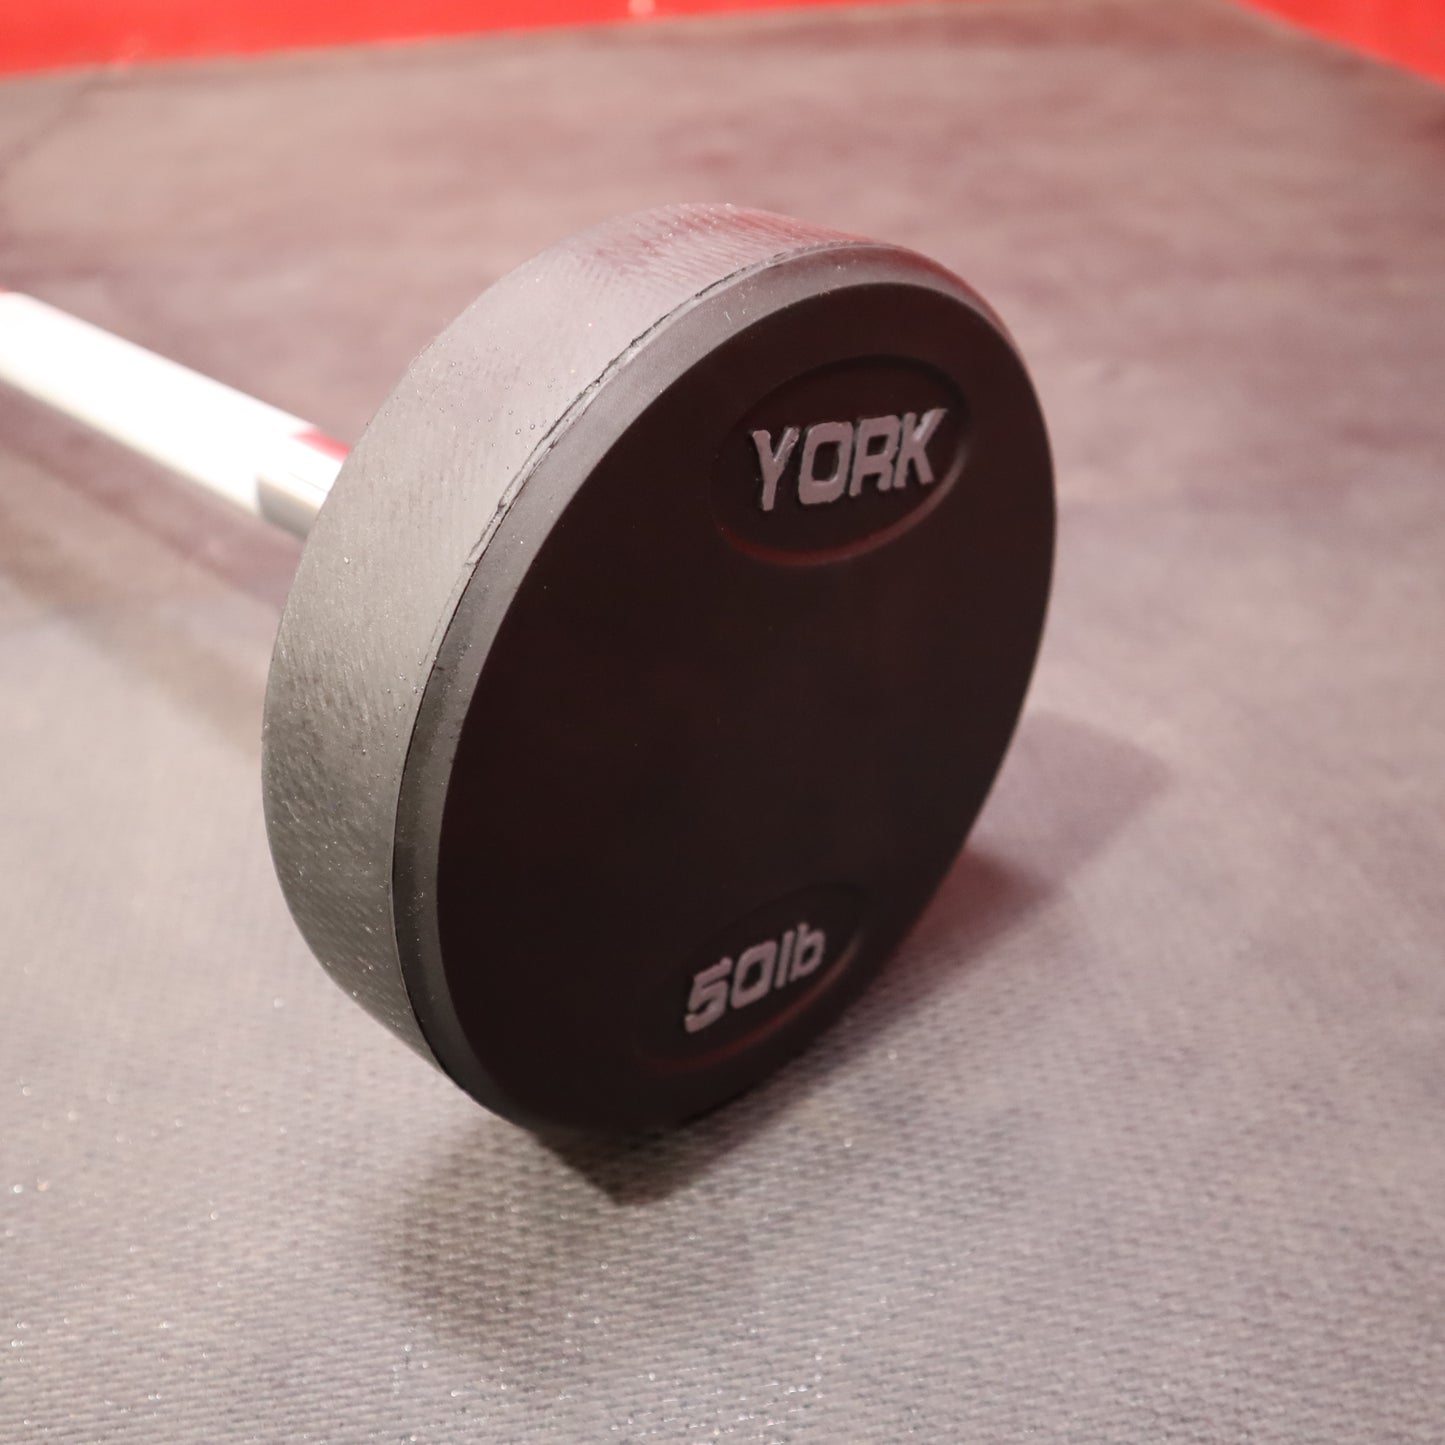 York Fixed Straight Rubber Weight Barbells (Nuevo)